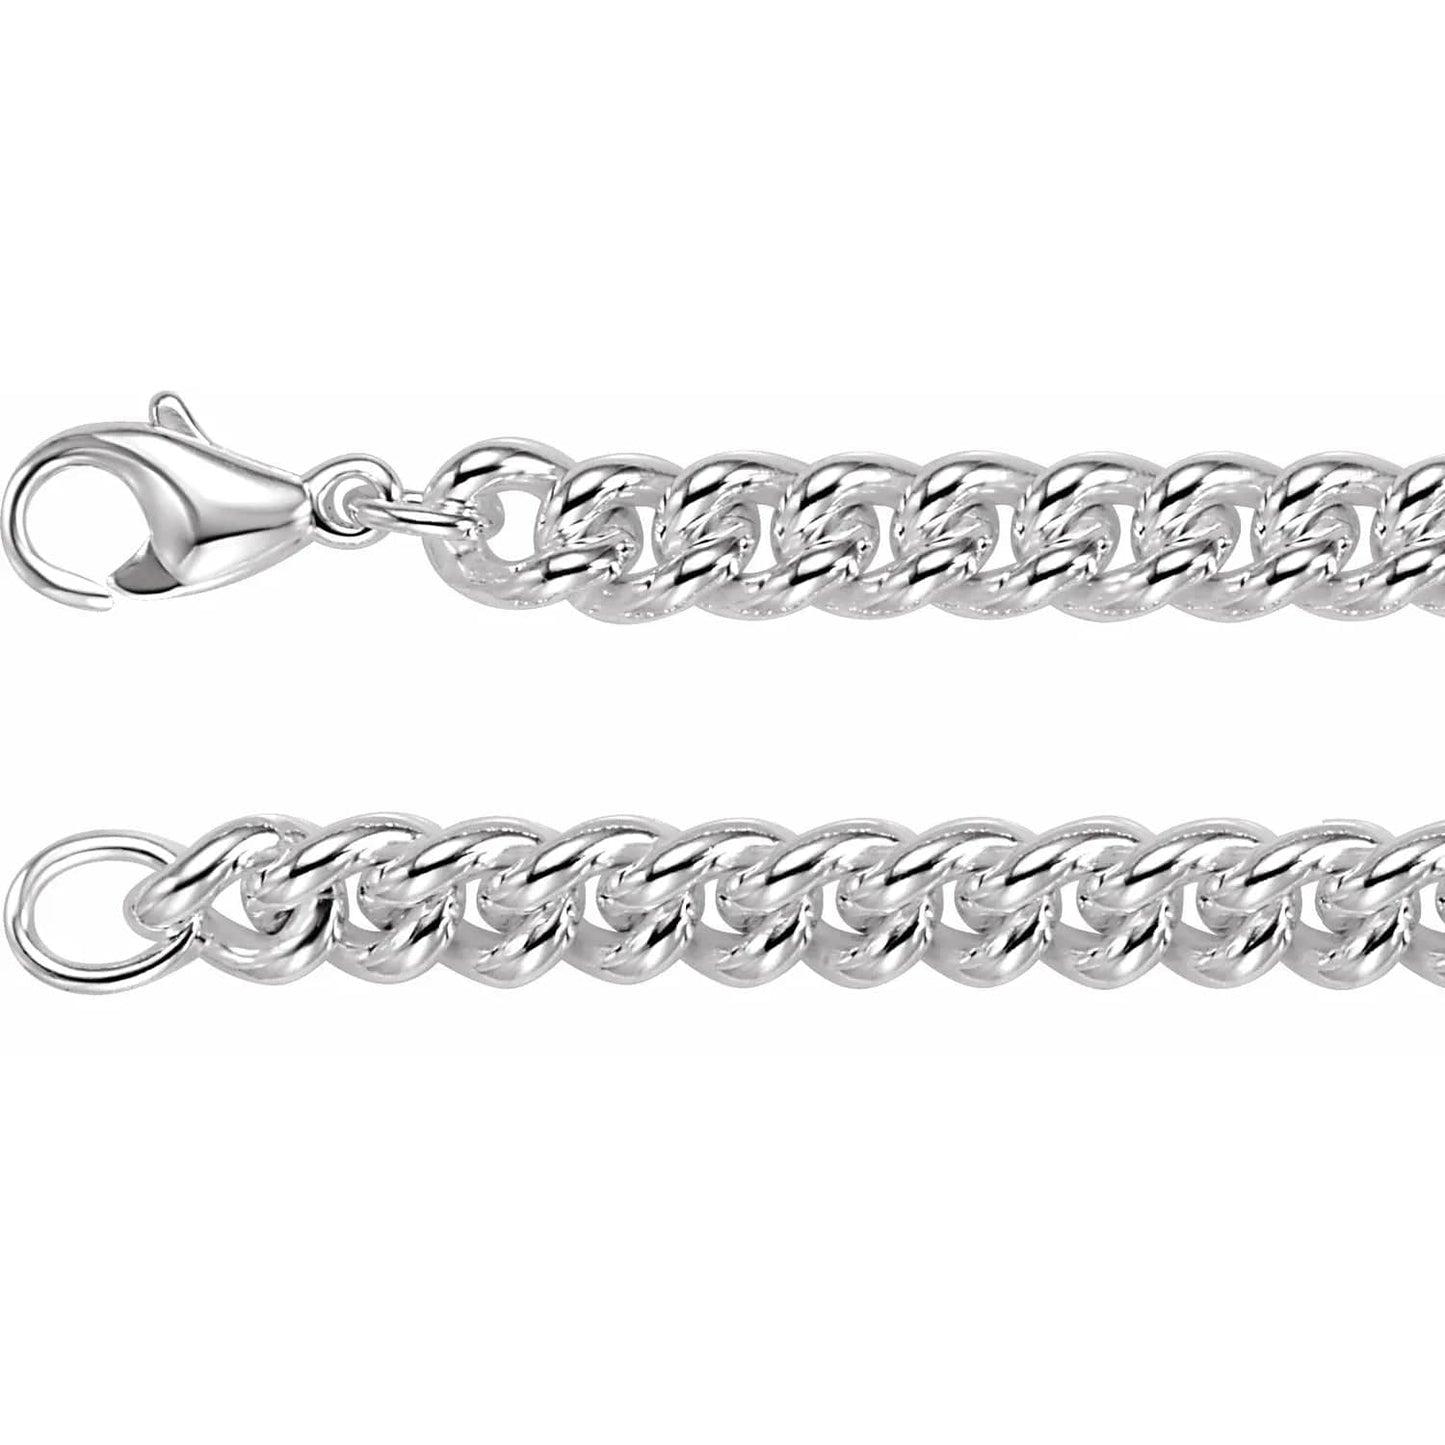 Save On Diamonds 8 inch Sterling Silver 8 mm Curb Chain